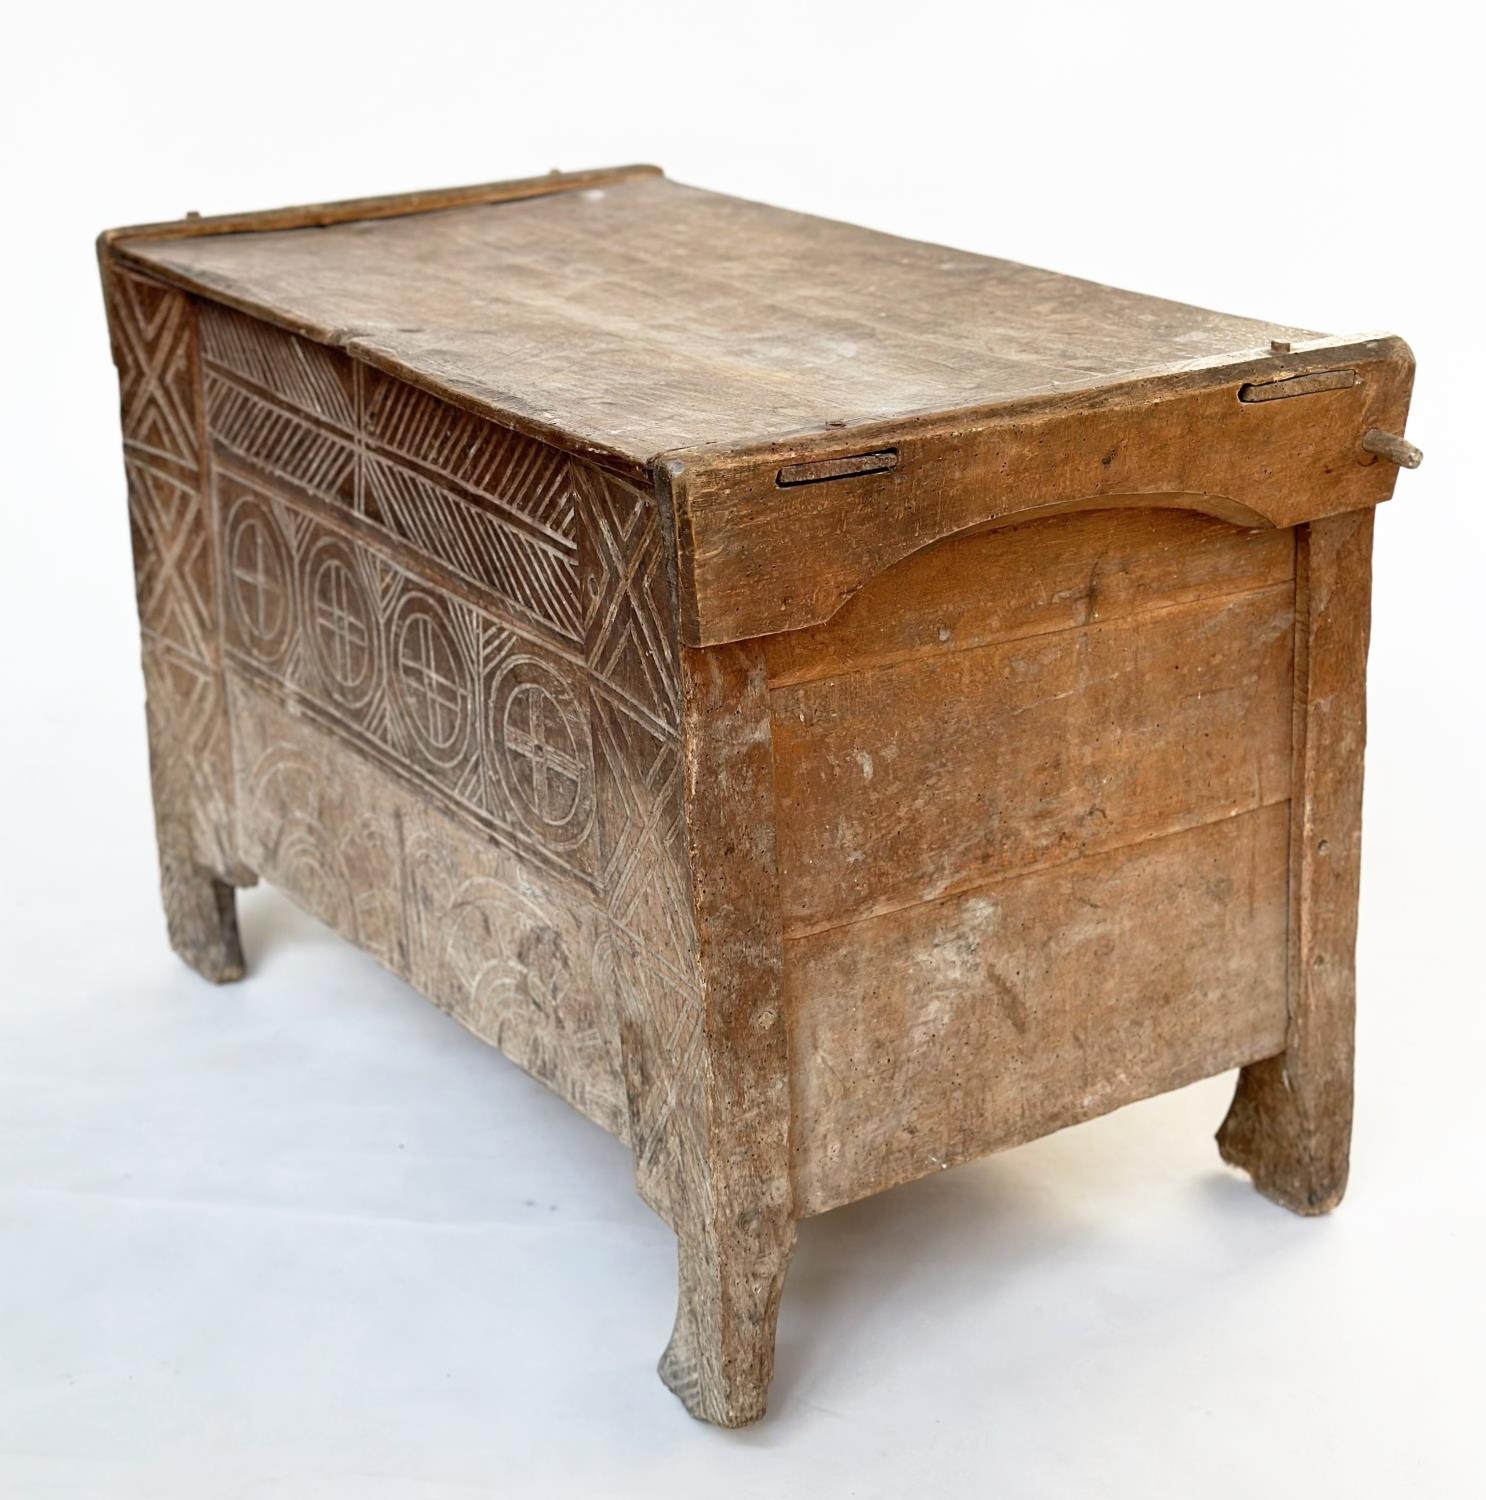 SCANDINAVIAN KISTA TRUNK, early 18th century sycamore of pegged construction with chip decorated - Image 10 of 12